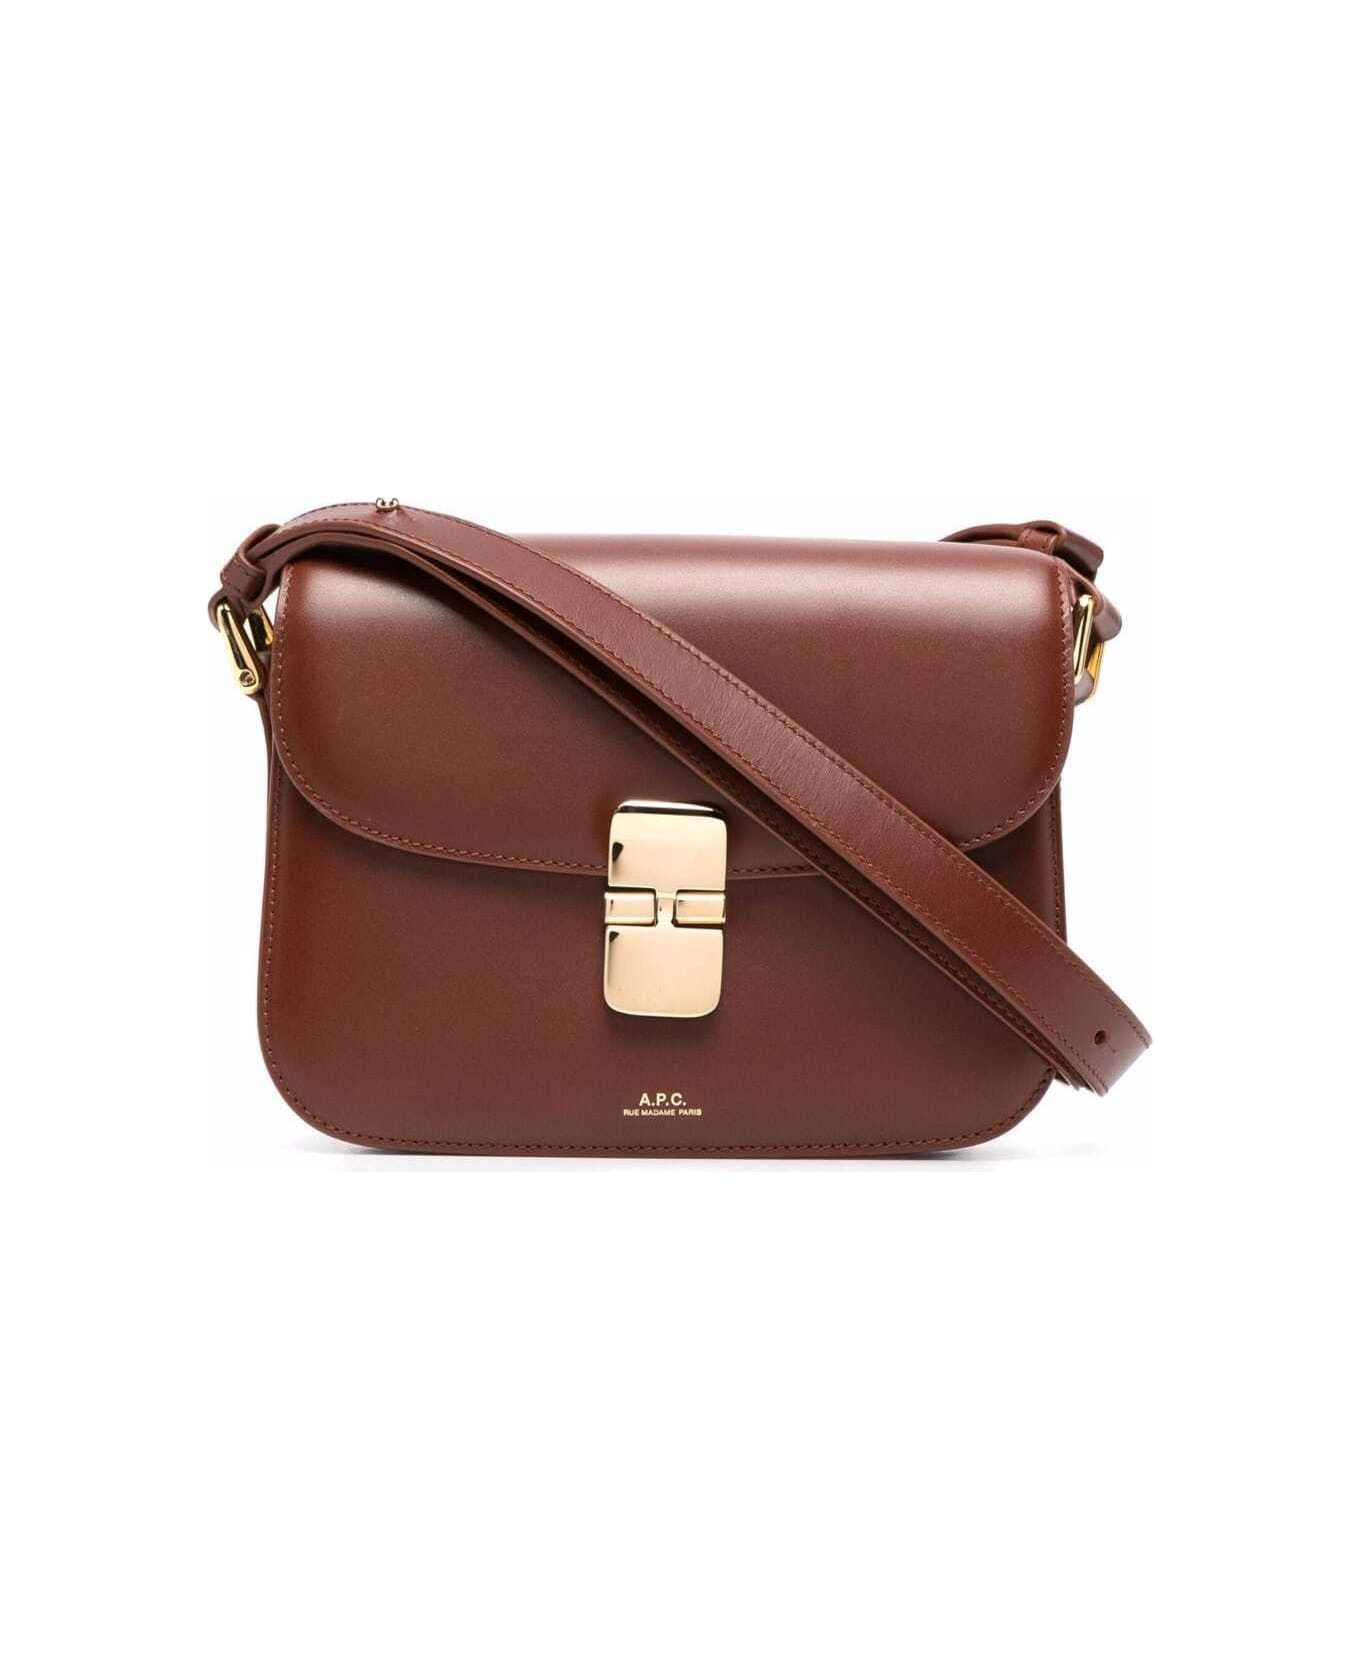 A.P.C. Grace Brown Leather Crossbody Bag - Brown